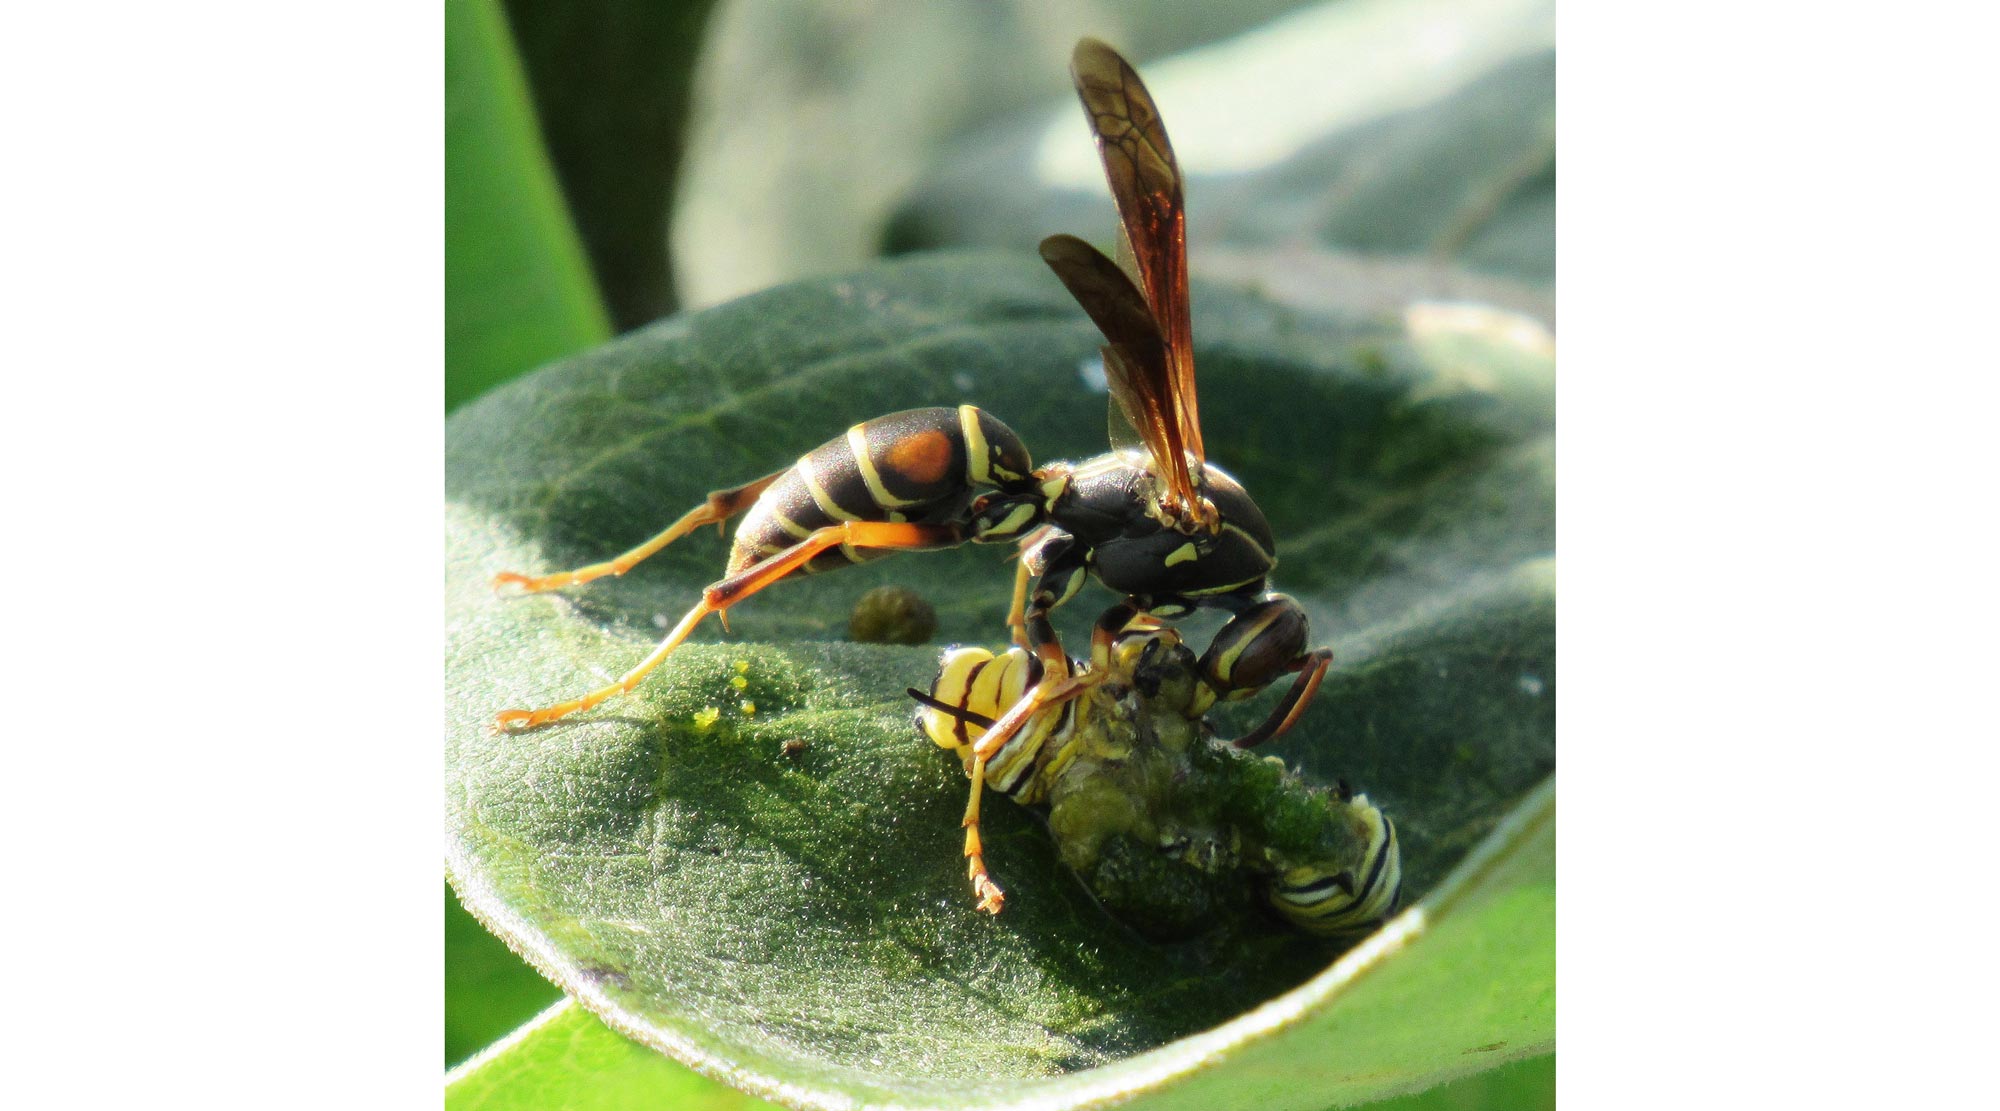 A paper wasp eating a caterpillar.